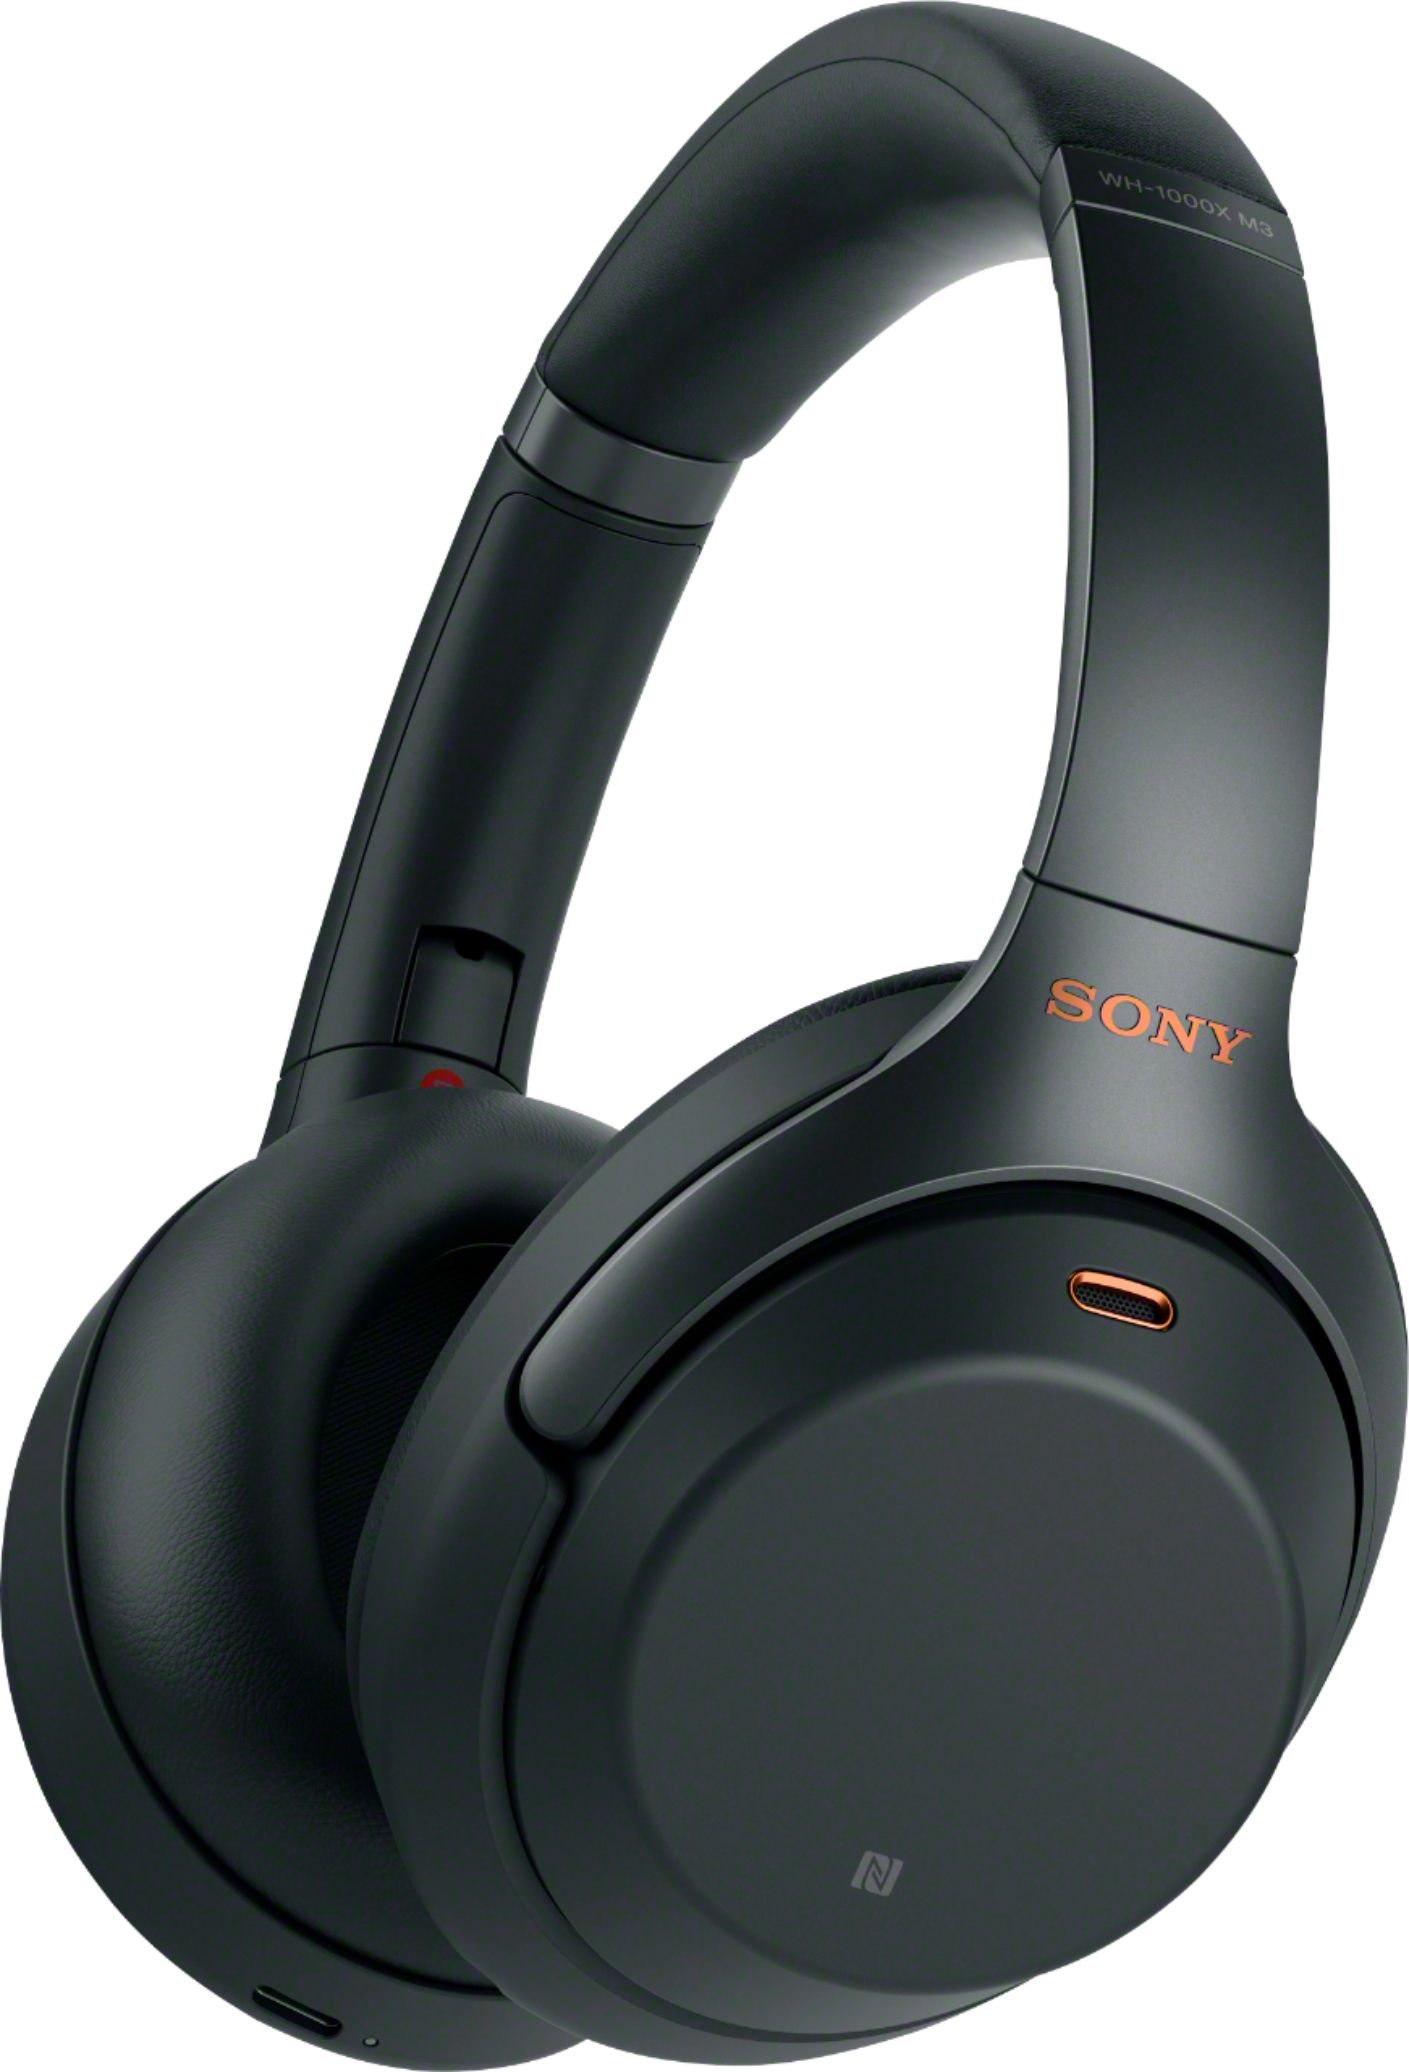 Sony WH-1000XM3 Wireless Noise Cancelling Over-the-Ear Headphones with Google Assistant Black WH1000XM3/B - Buy